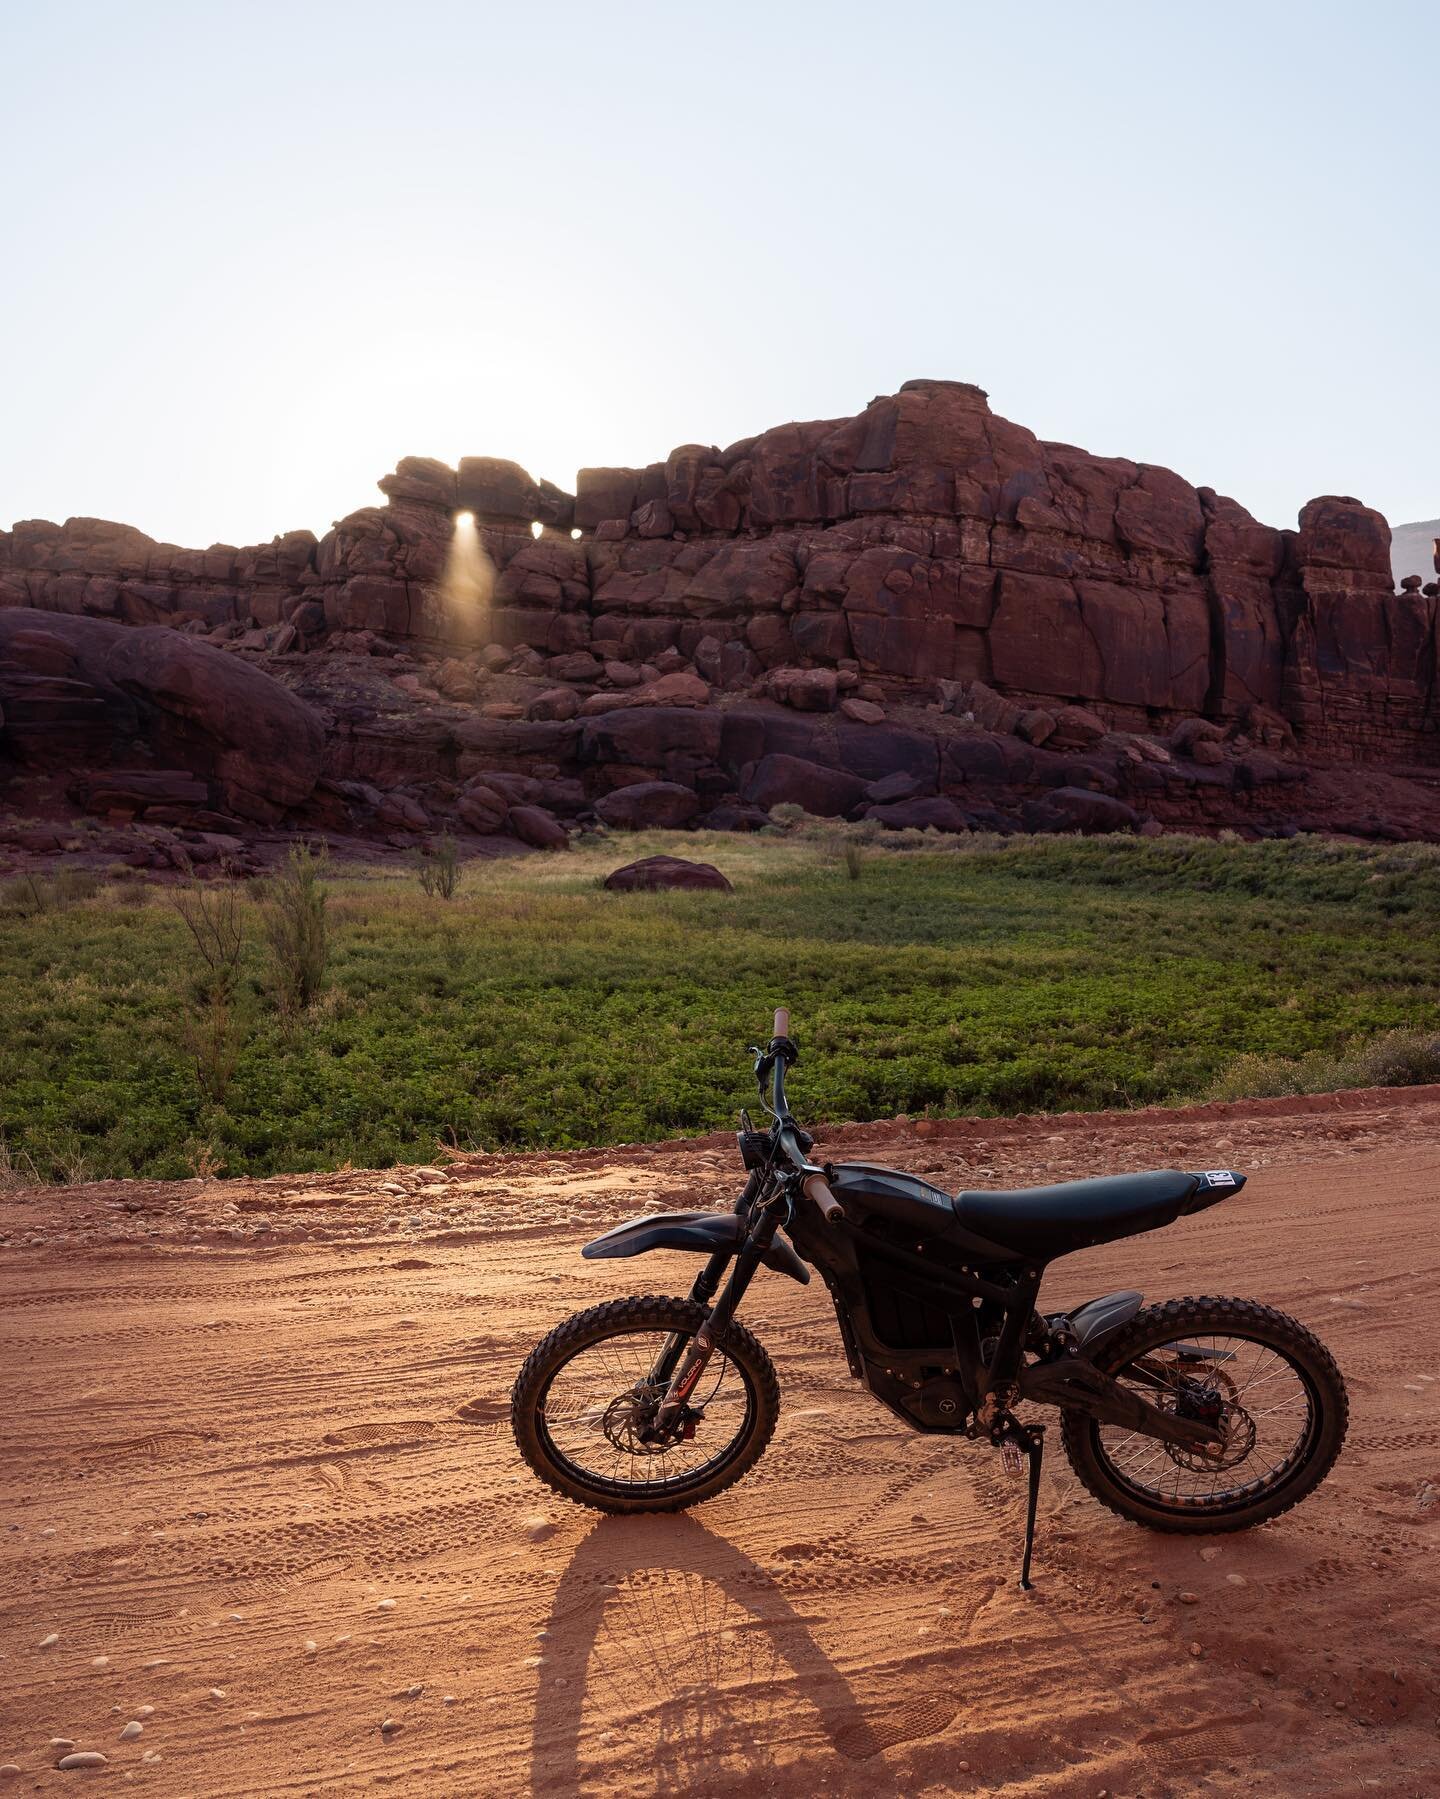 Lightweight, powerful, and silent - our Talaria bikes are very easy to ride and even easier to enjoy 🏜️ Make sure to upgrade to a Kuberg if you want even more torque and speed! ⚡️